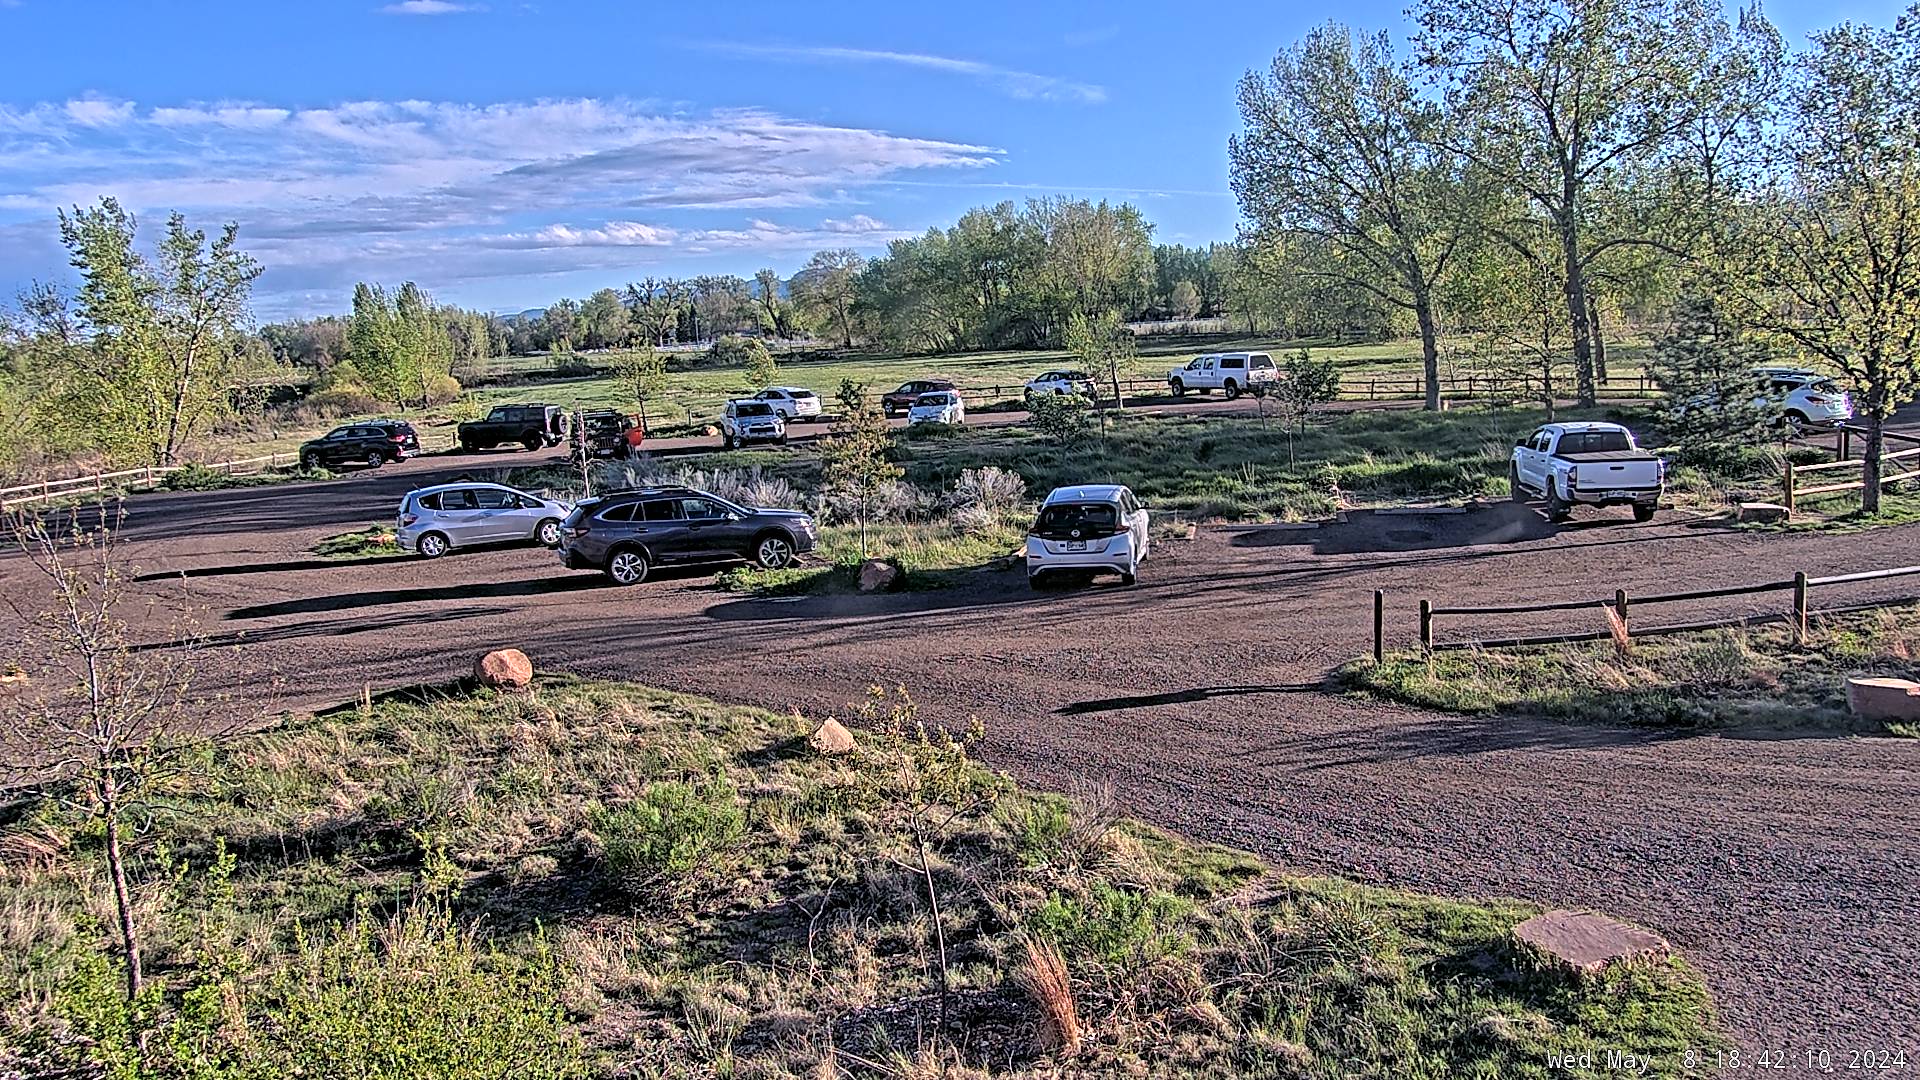 Live view of the Pella Crossing Trailhead parking lot